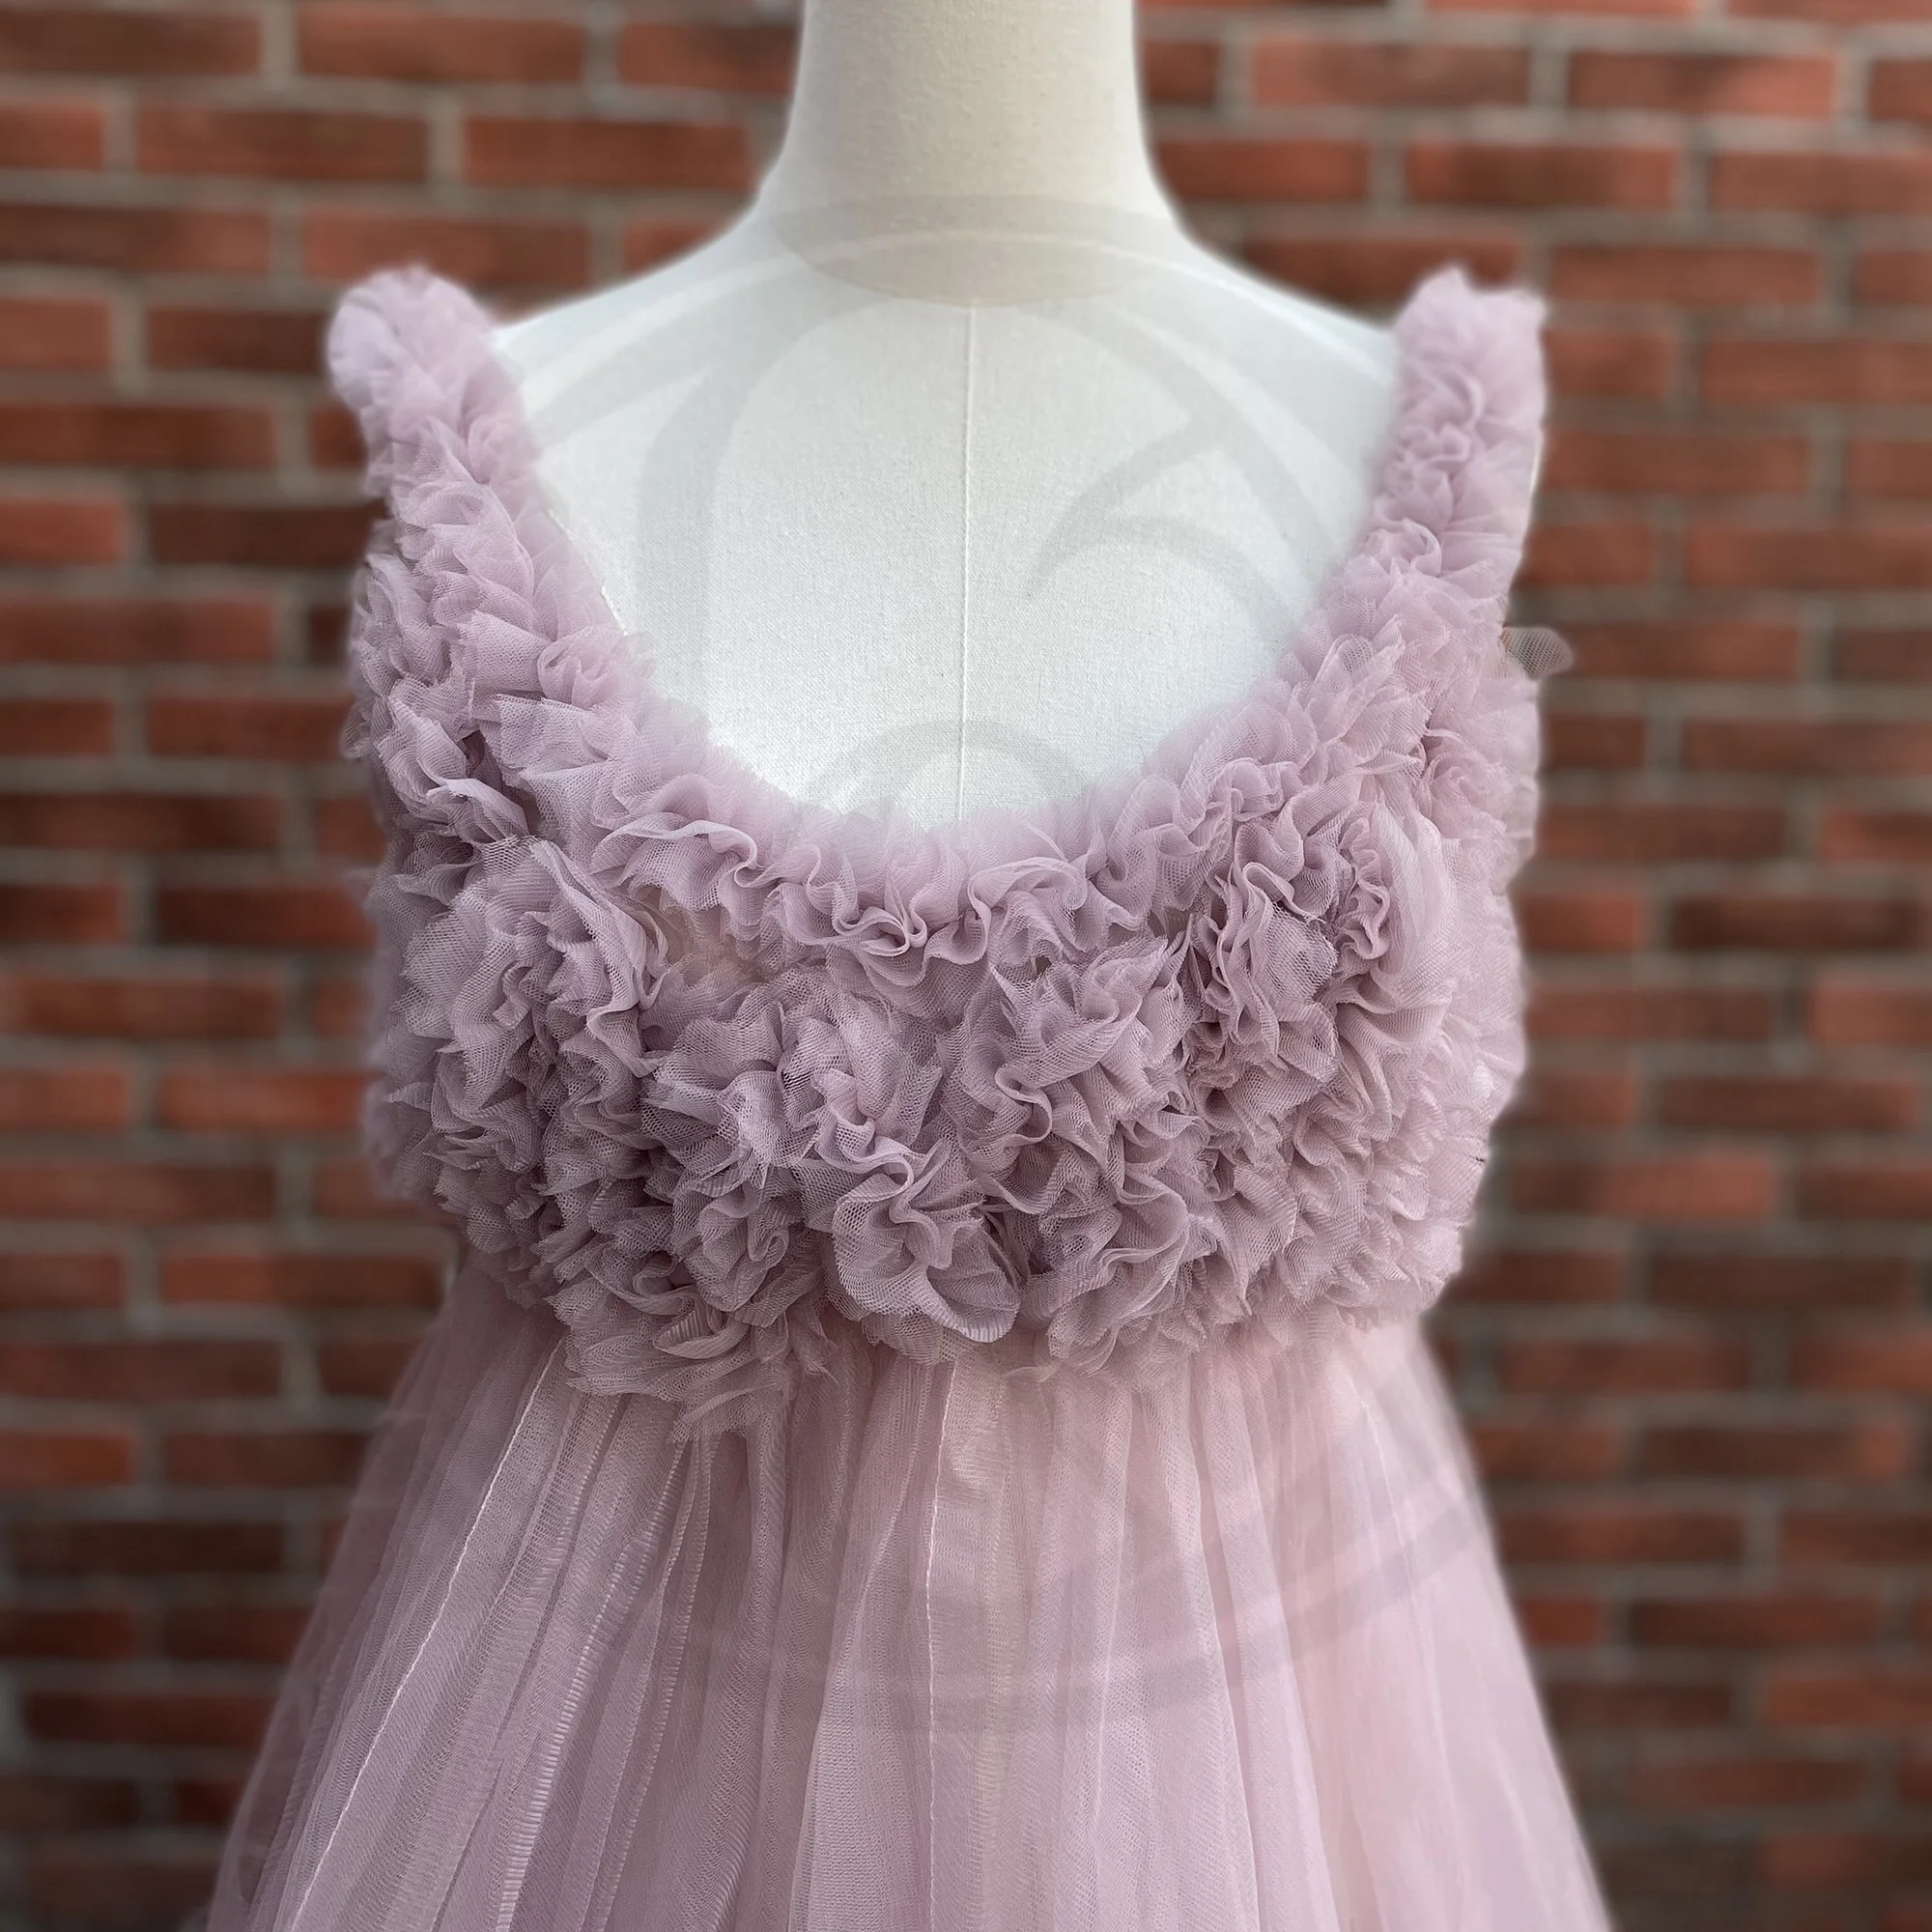 Beautiful Photo Light Purple Tulle Maternity Cothing Pregnant Gown Couture Robe Woman Photography Costume Baby Shower Dress enlarge